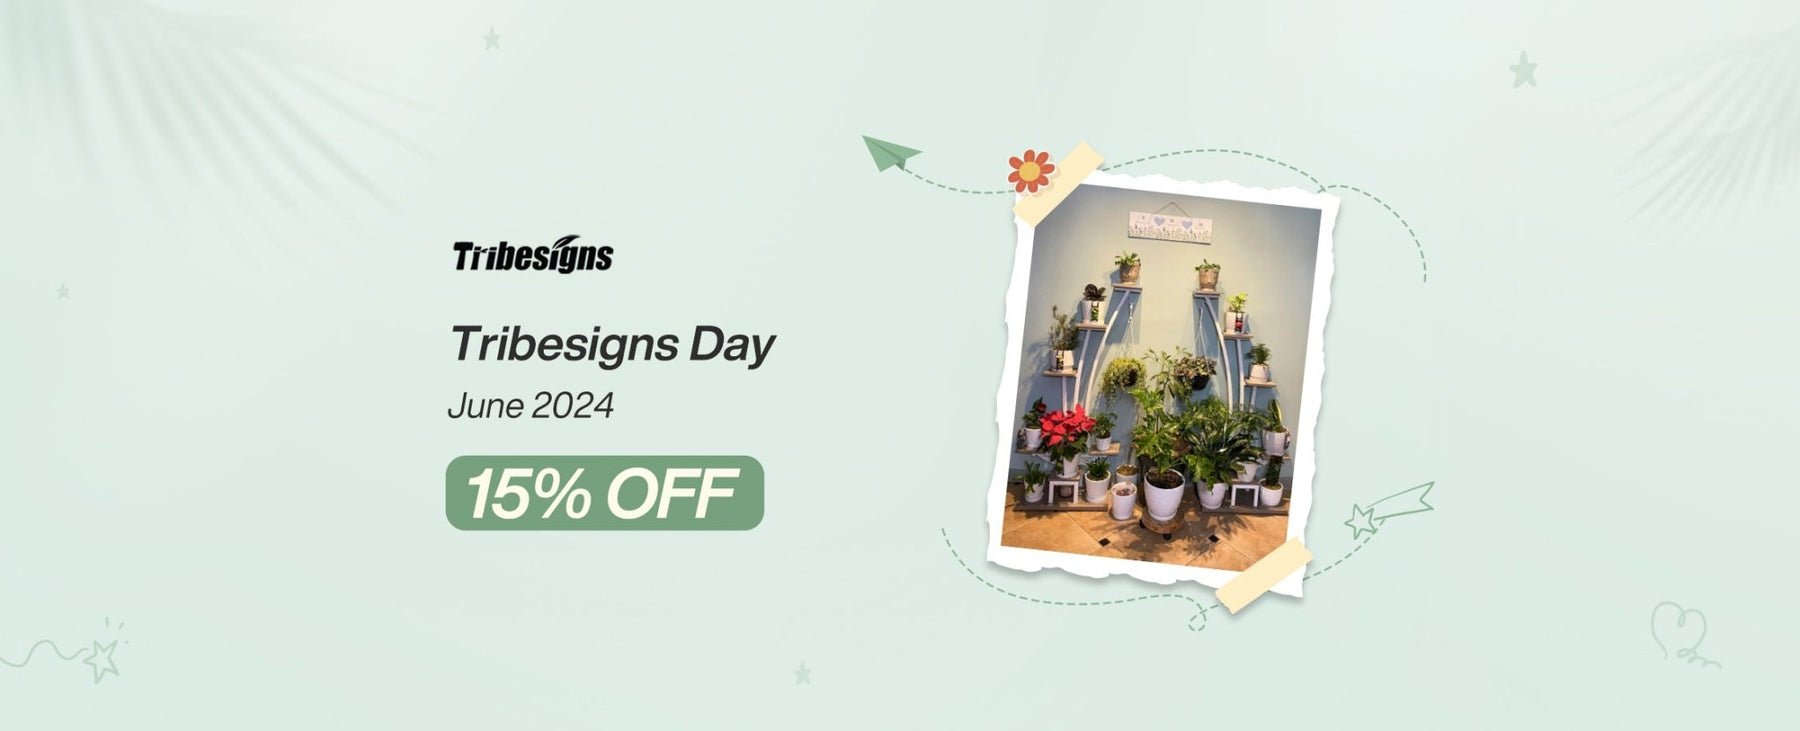 Tribesigns Day in June 2024: Save Big on Furniture - Tribesigns